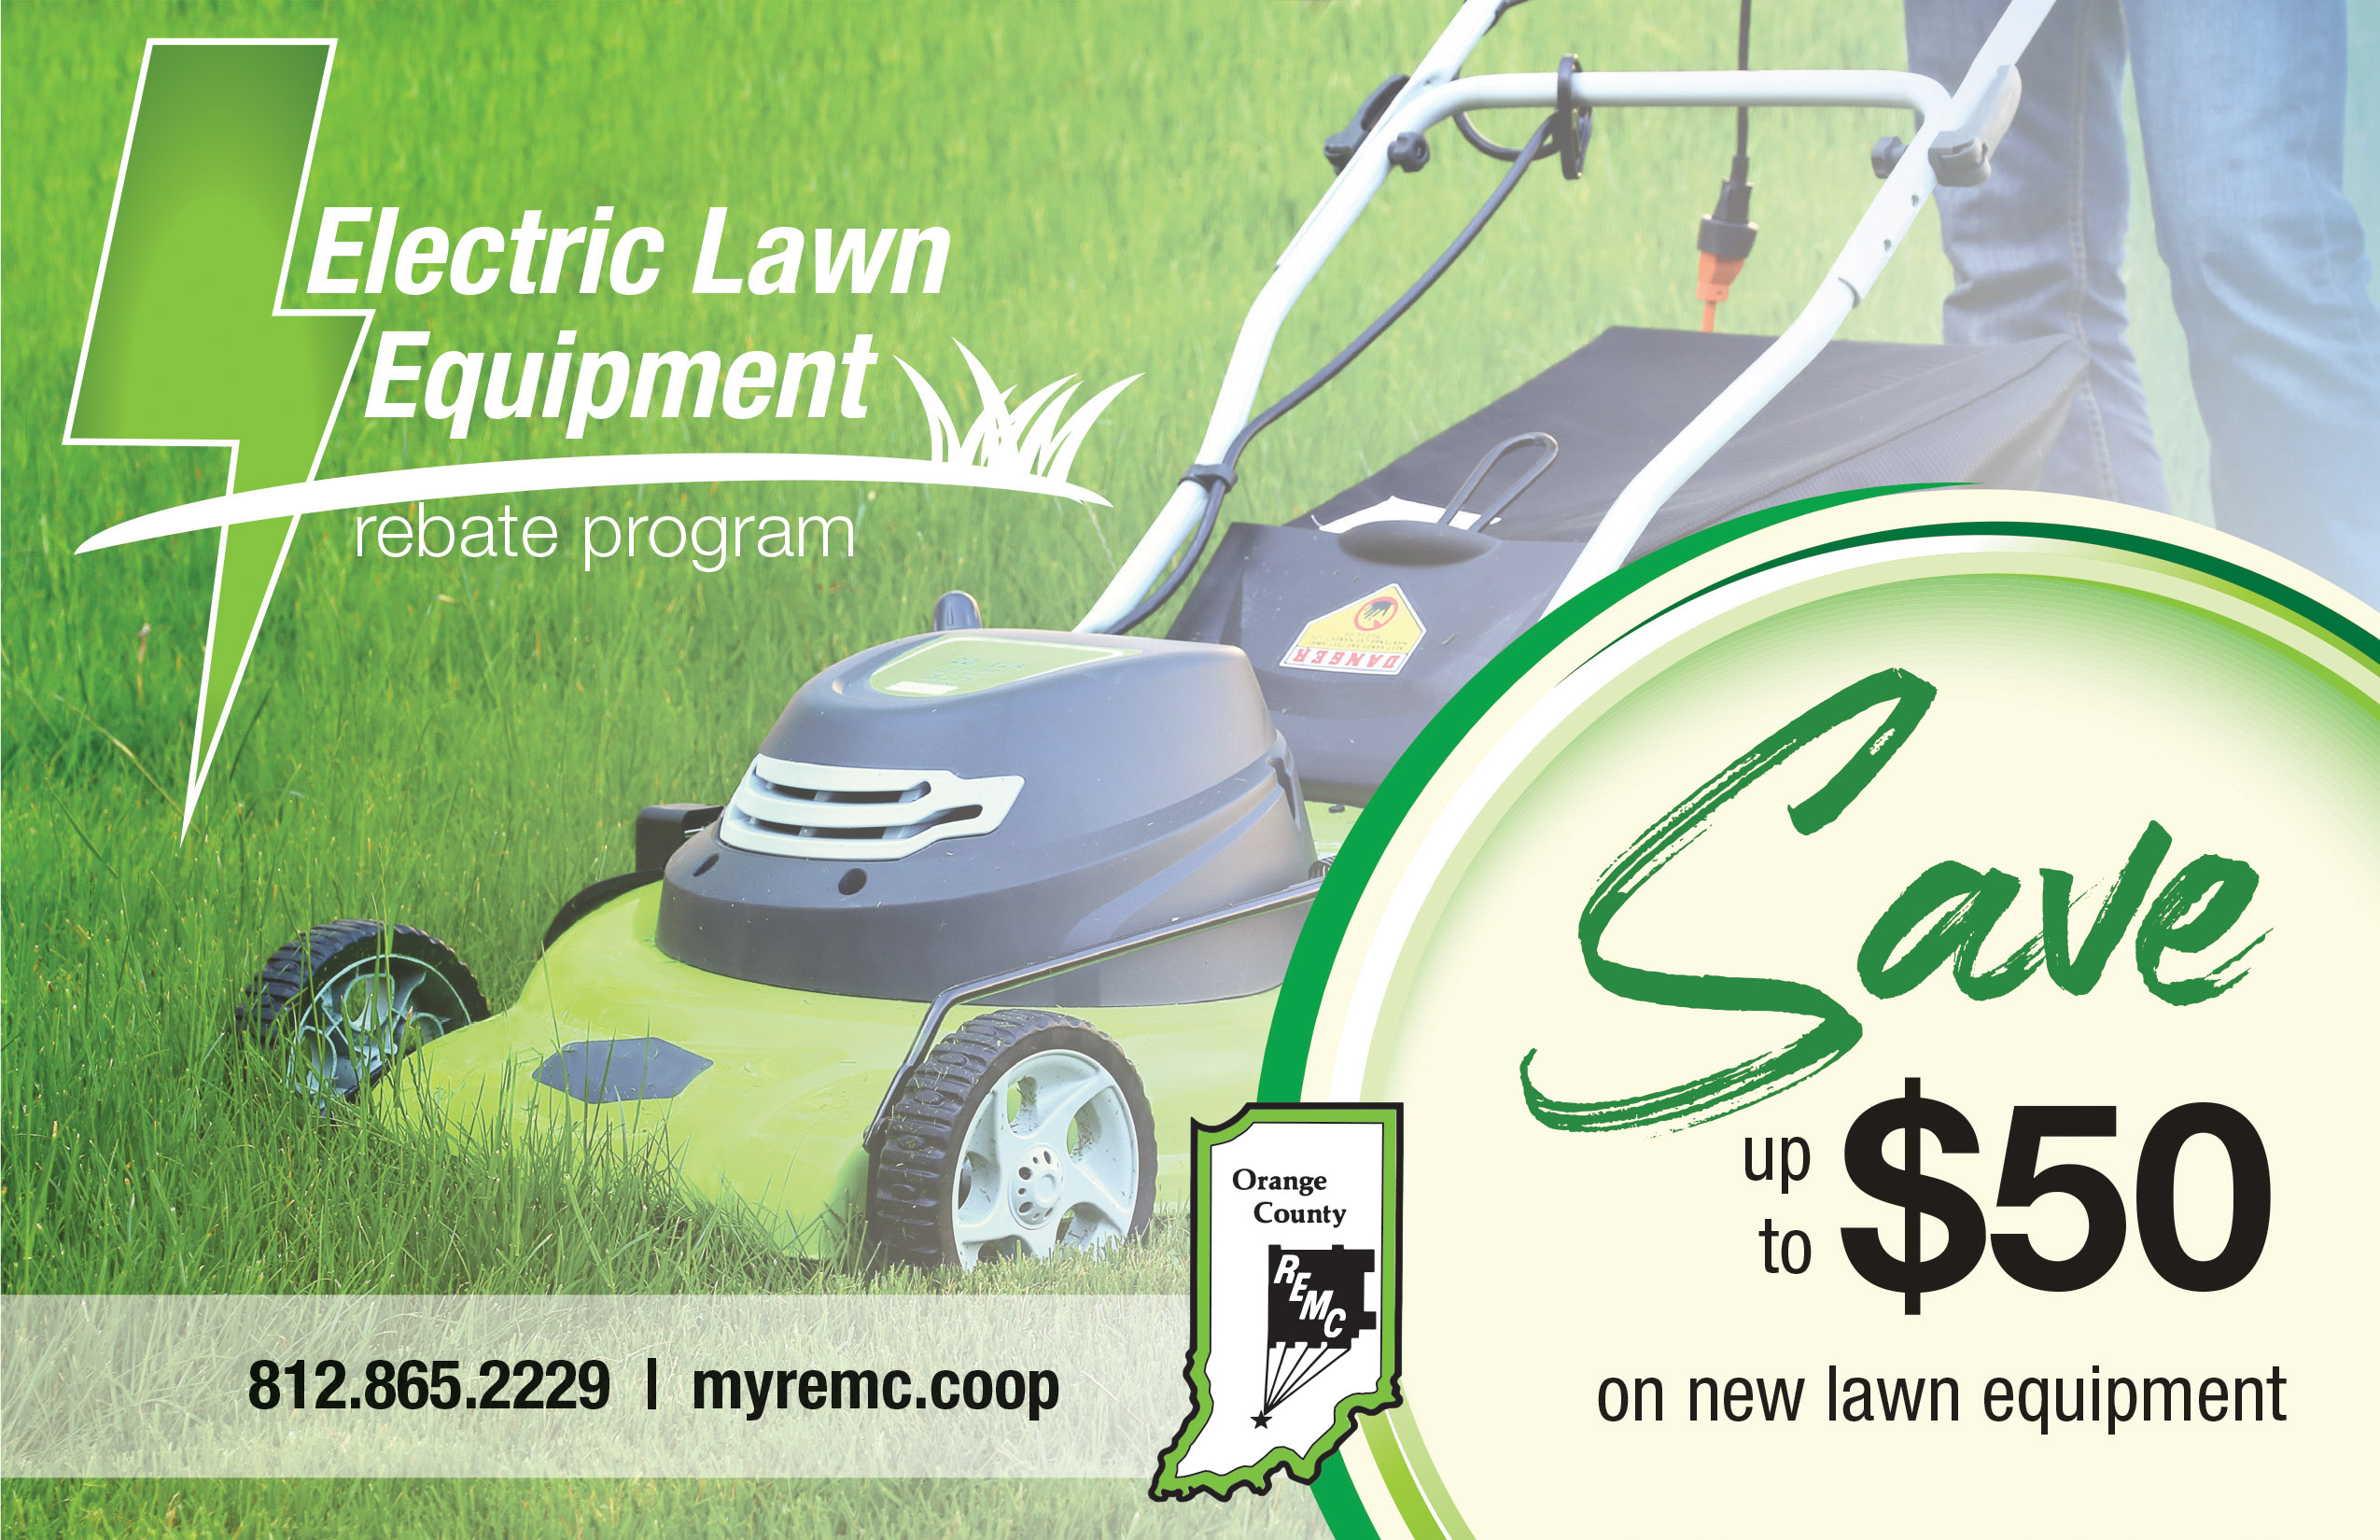 rebates-available-for-electric-lawn-equipment-indiana-connection